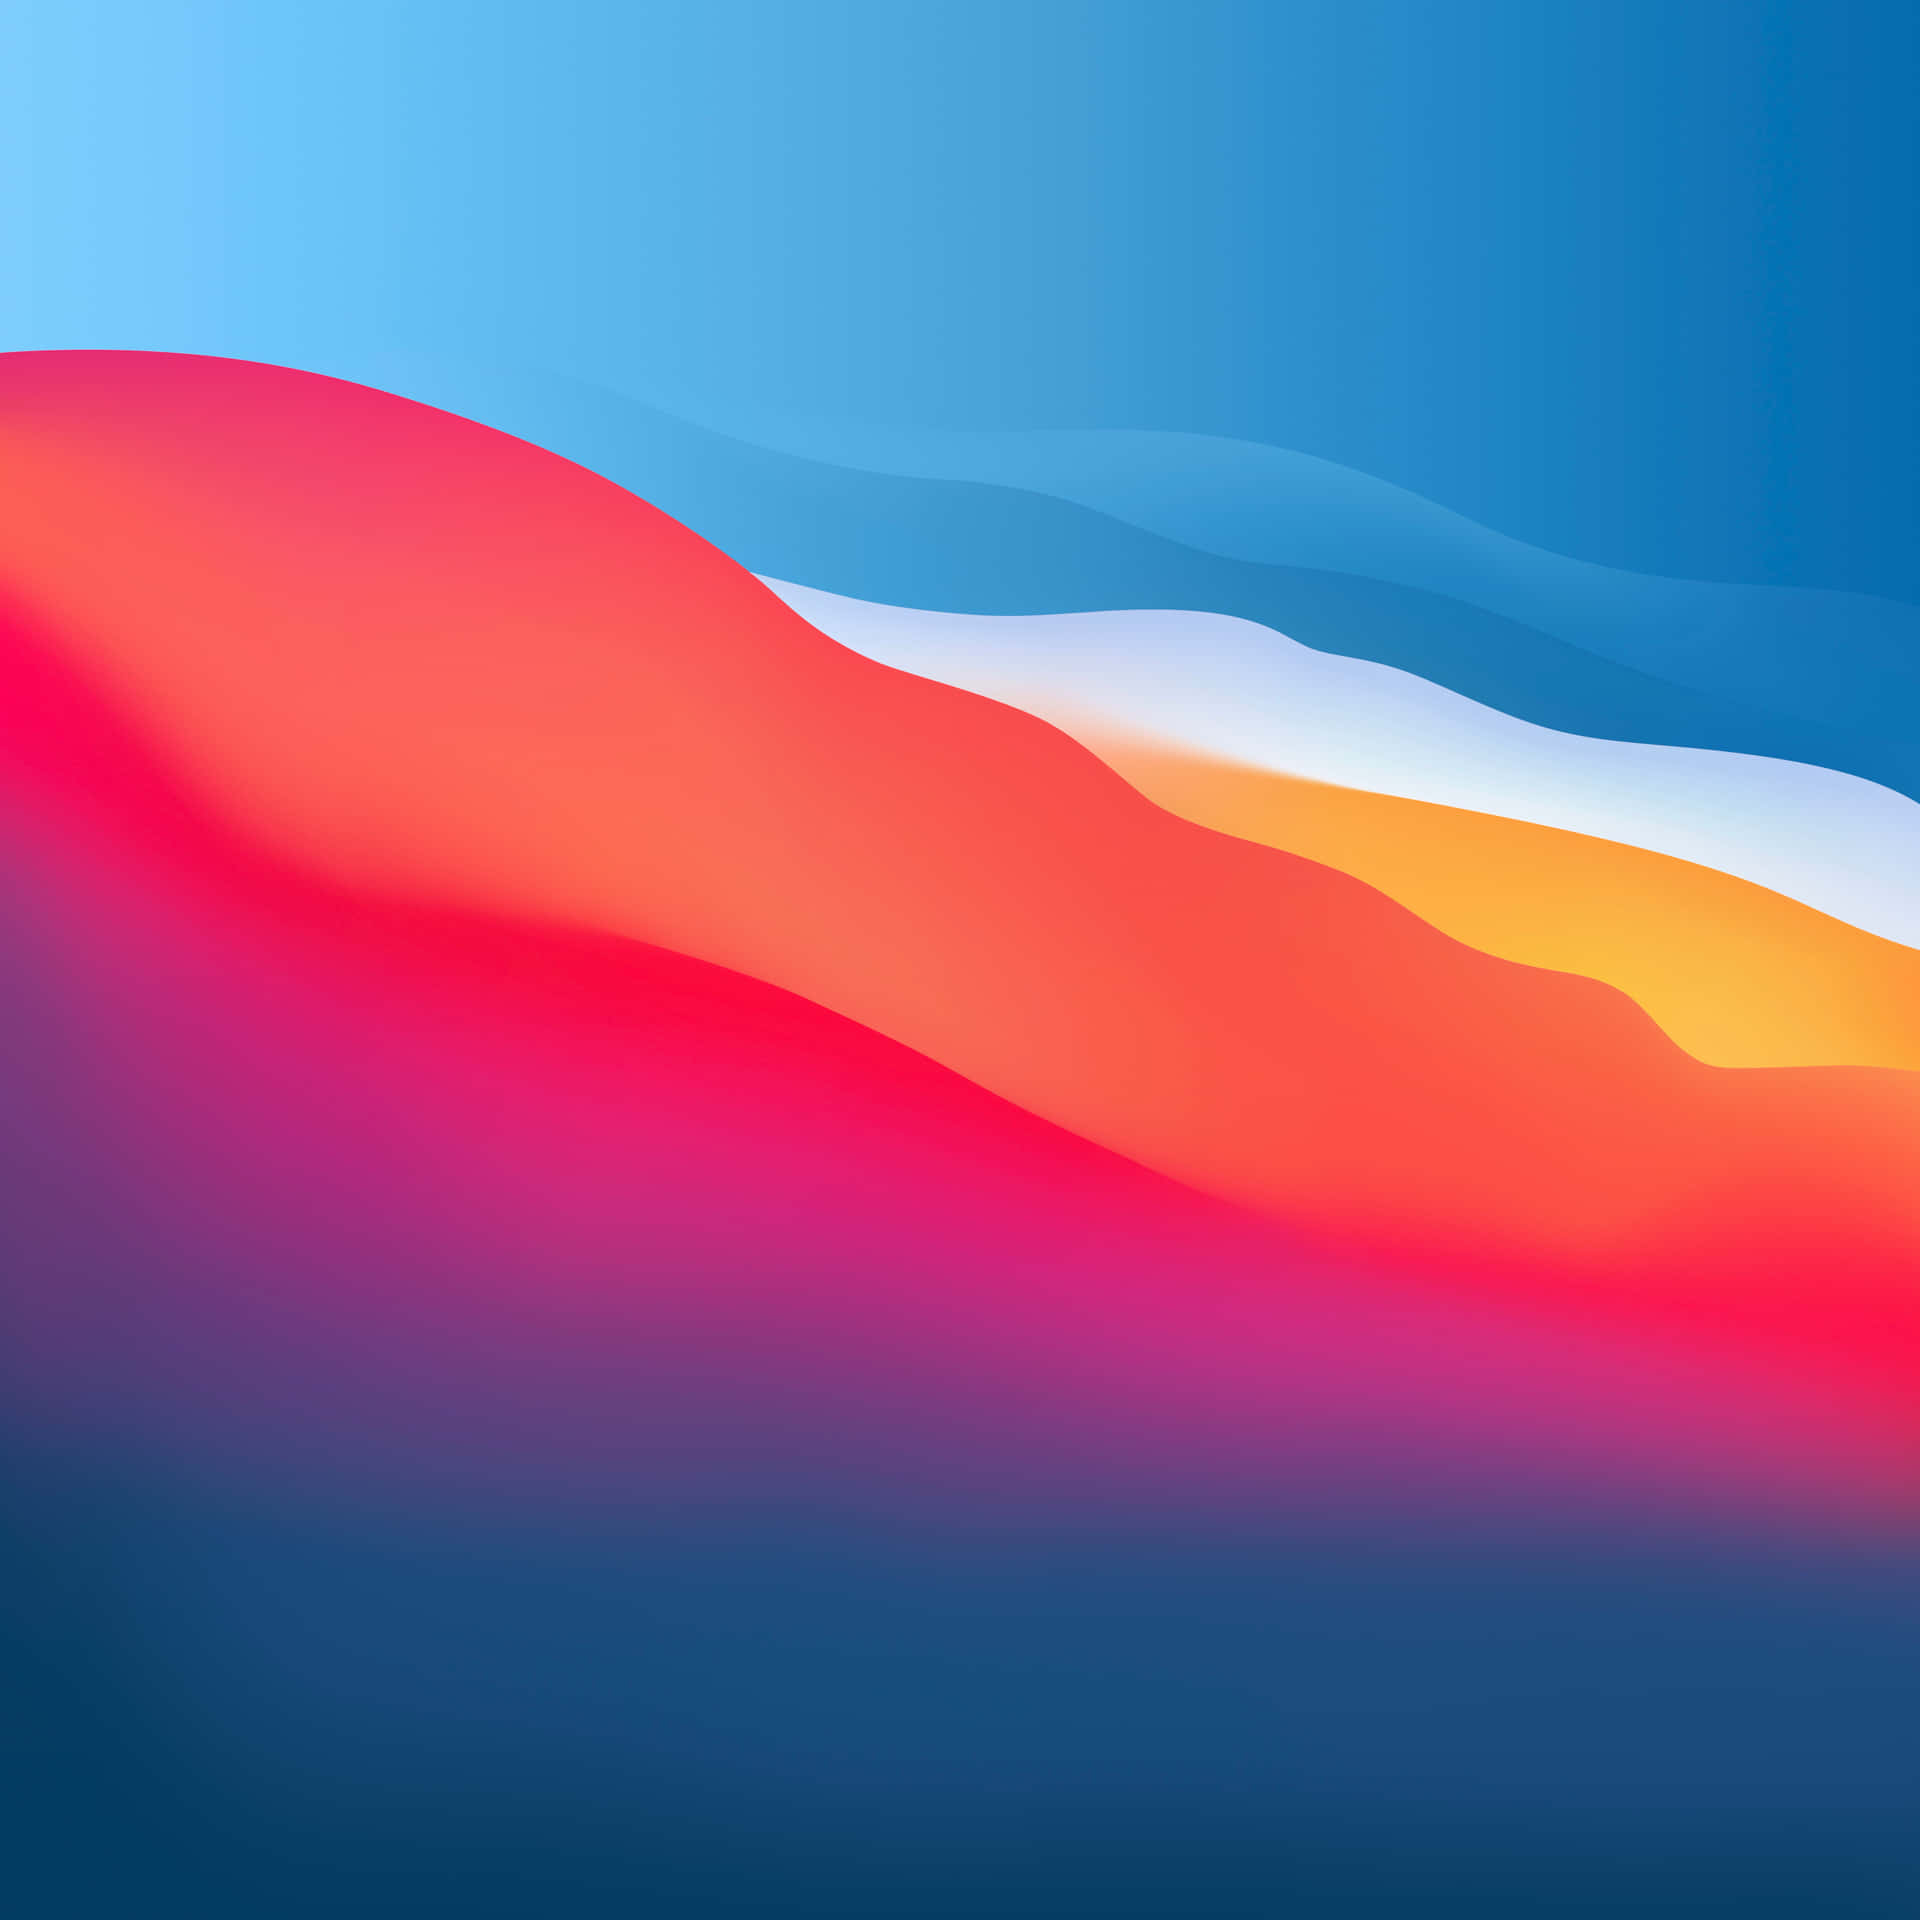 An Abstract Image Of A Colorful, Blue And Red Background Background